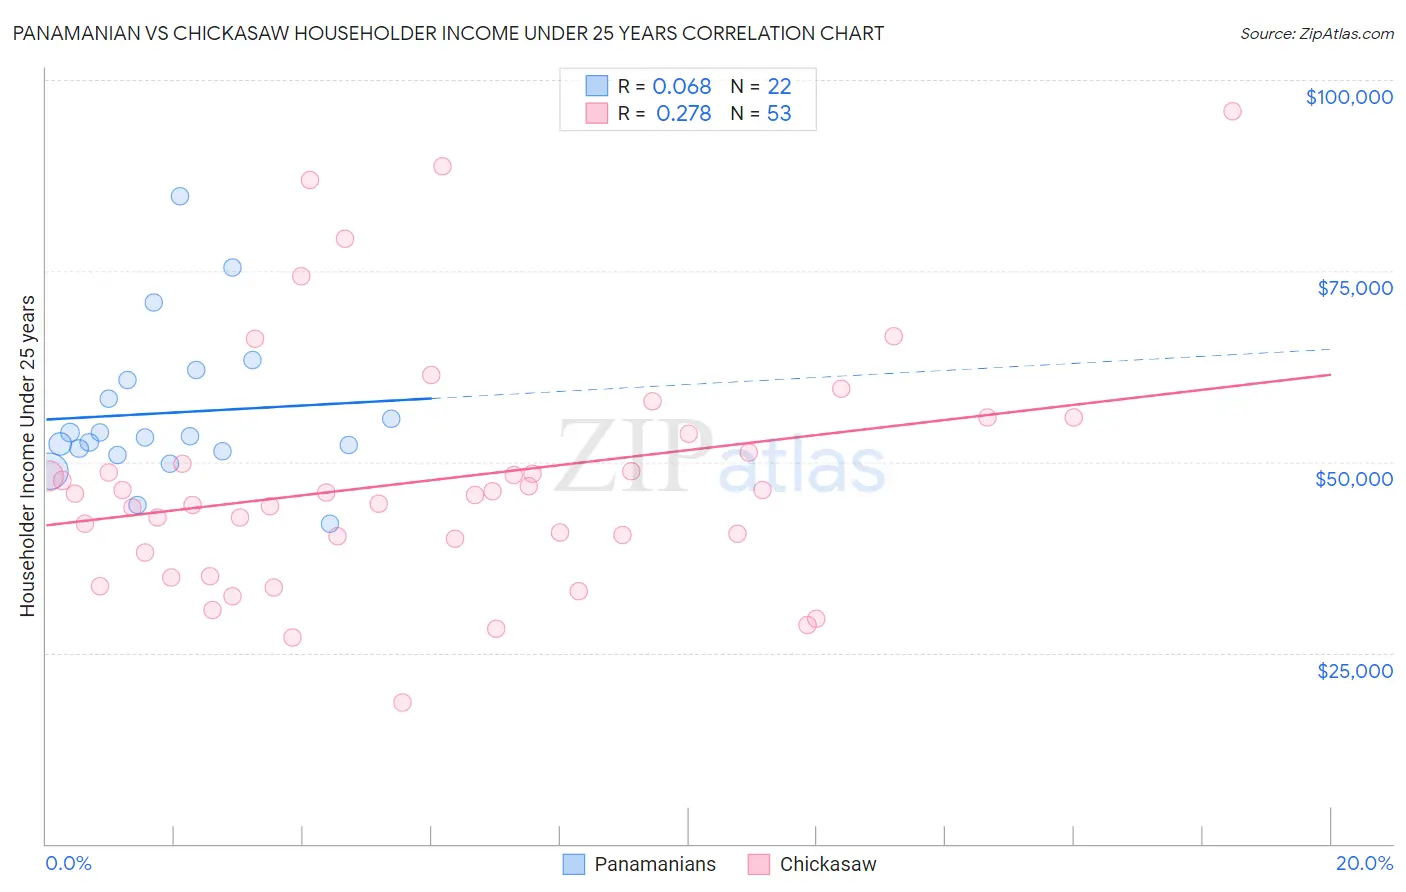 Panamanian vs Chickasaw Householder Income Under 25 years